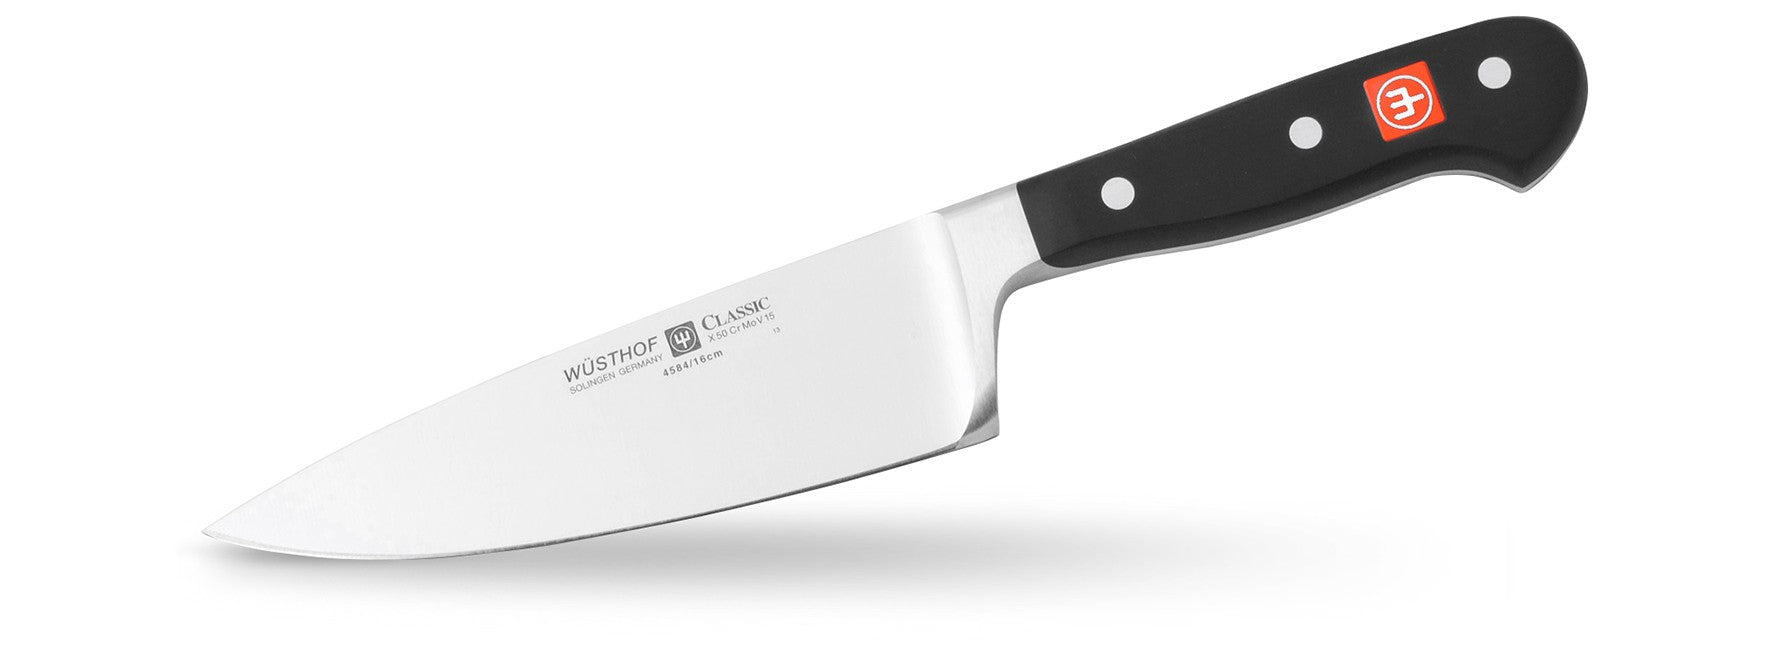 WUSTHOF Classic 6 Inch Extra Wide Cook’s Knife Model 4584-7/16